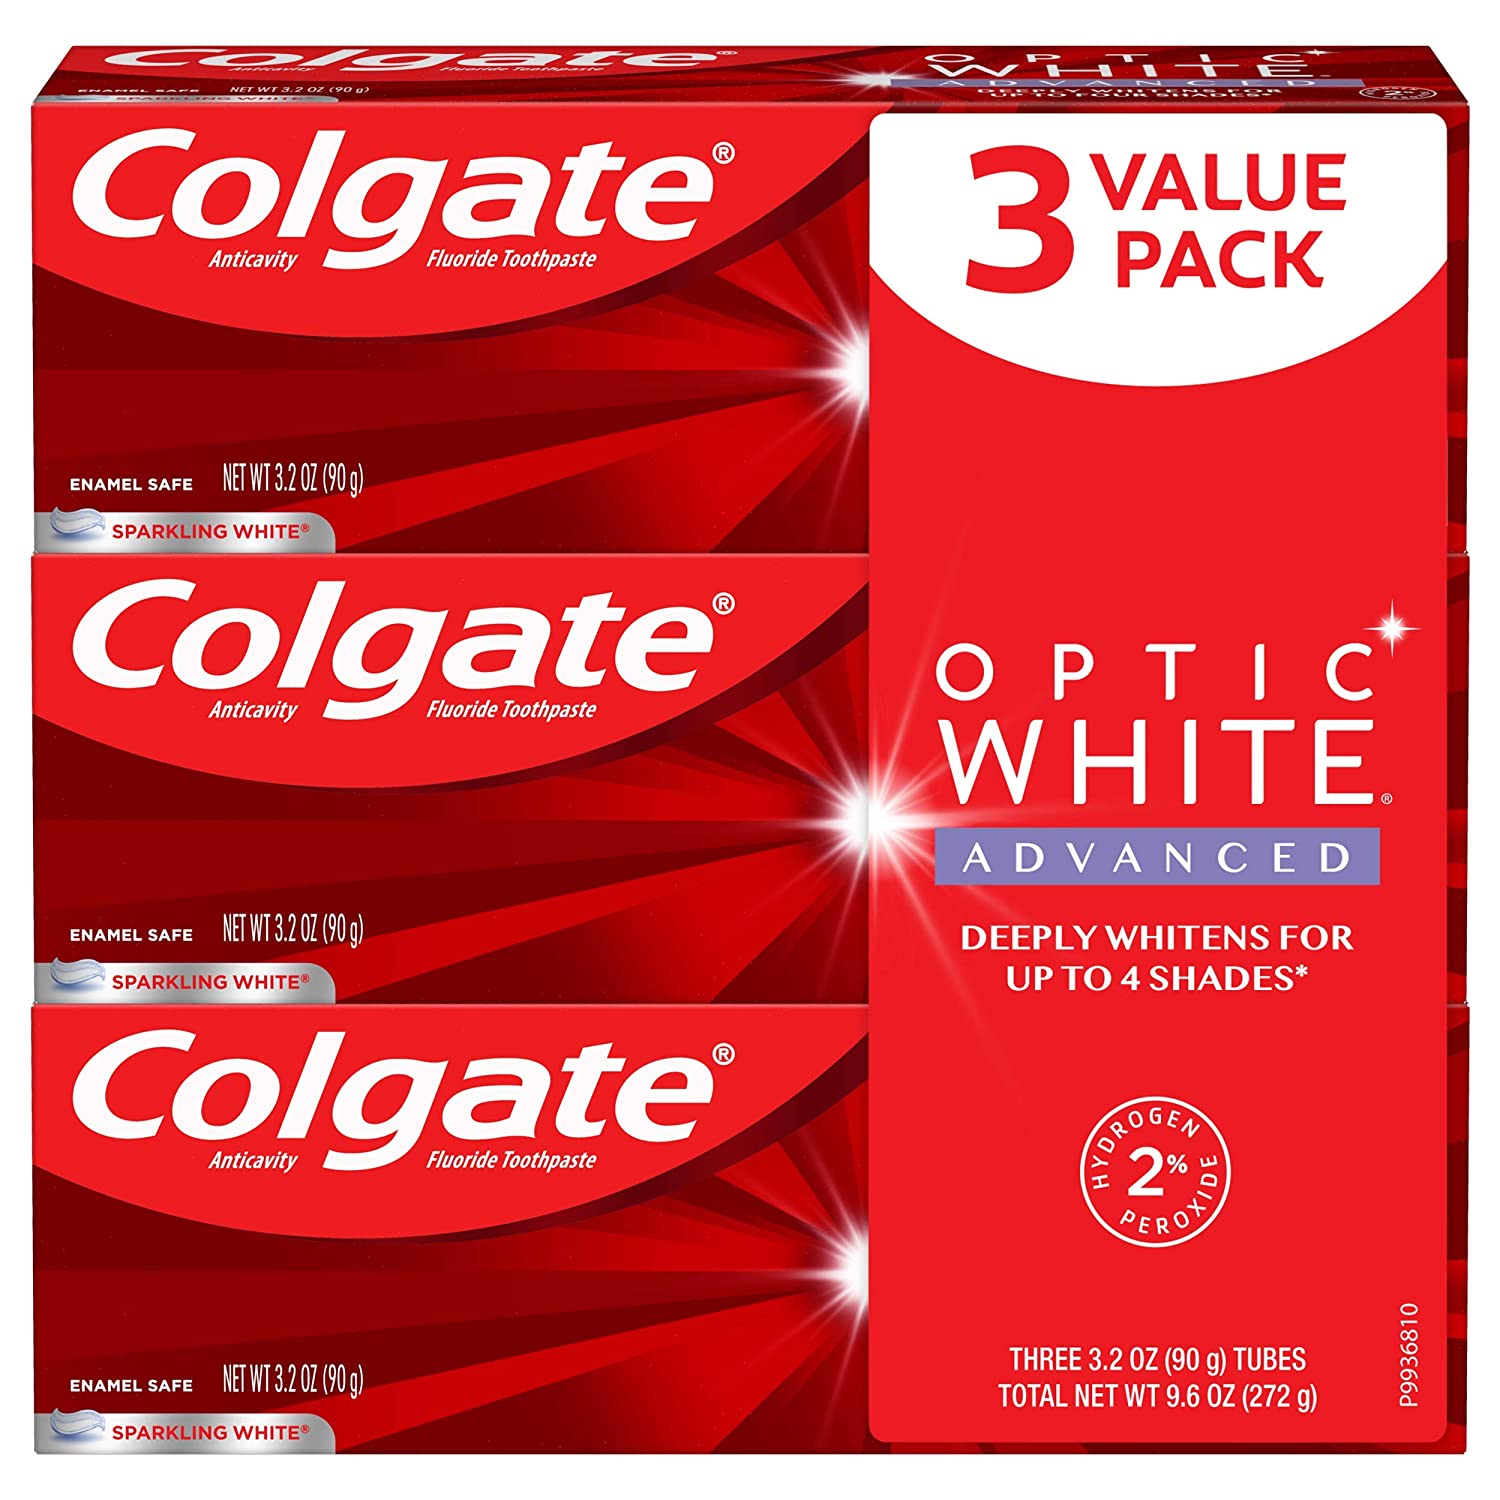 Amazon: 3-Pack Colgate Optic White Advanced Teeth Whitening Toothpaste with Fluoride, 2% Hydrogen Peroxide, Sparkling White - 3.2 Ounce $8.05 w/ S&S + FS w/ Prime & MORE